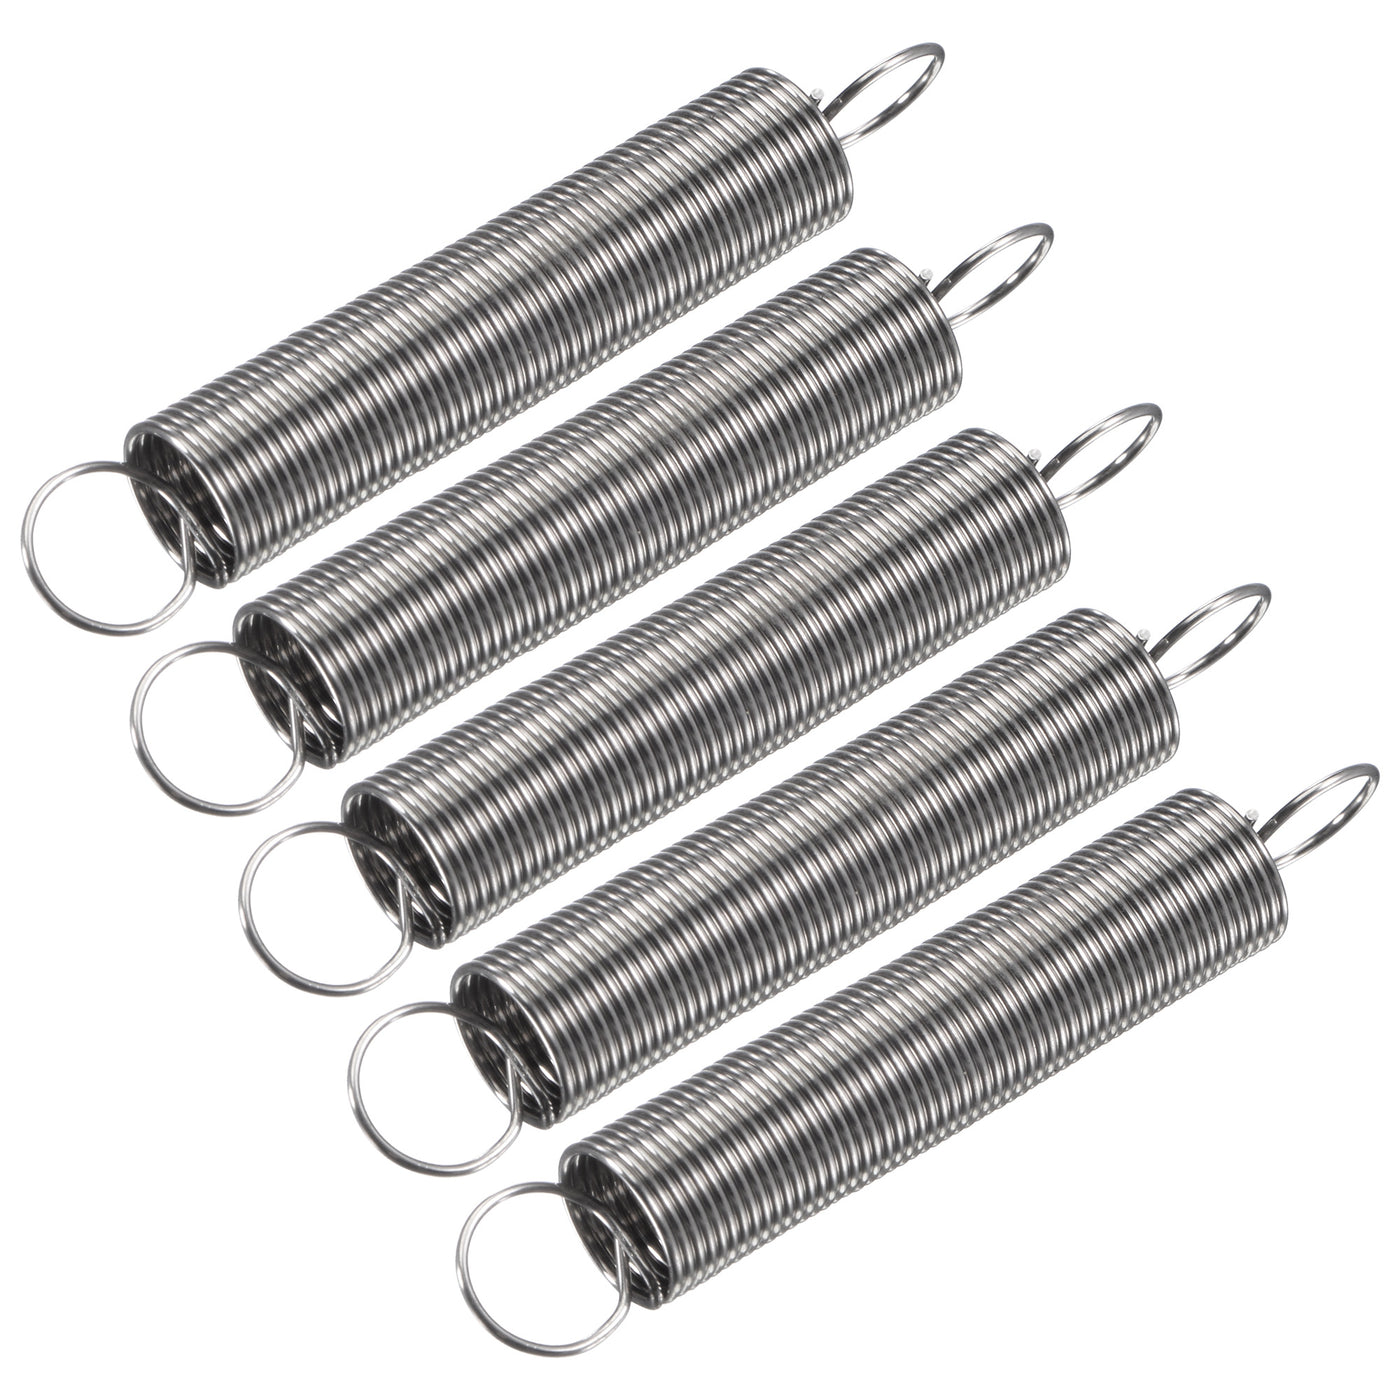 Uxcell Uxcell 0.6mmx8mmx50mm Extended Compression Spring,2.3Lbs Load Capacity,Silver,10pcs